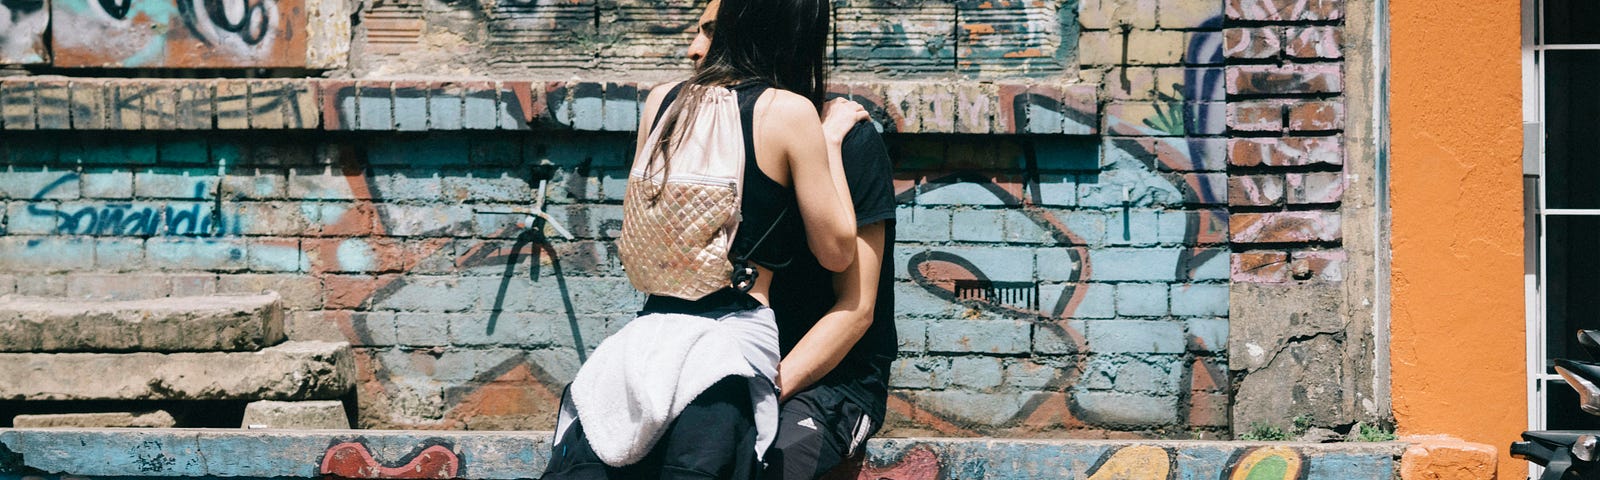 Young teenage couple hugging against a graffiti covered wall